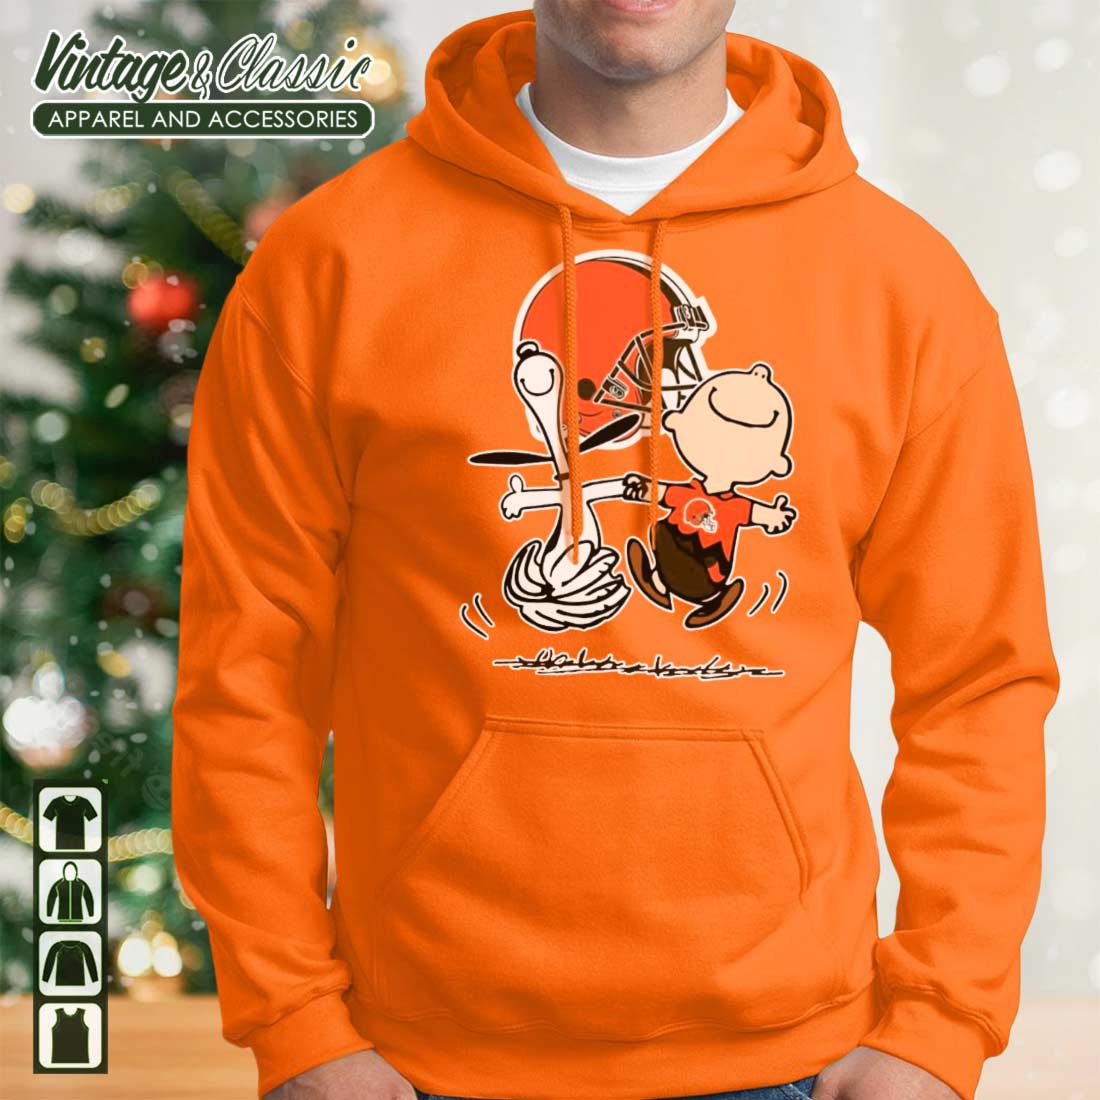 charlie-brown-snoopy-cleveland-browns-shirts-vintagenclassic-tee